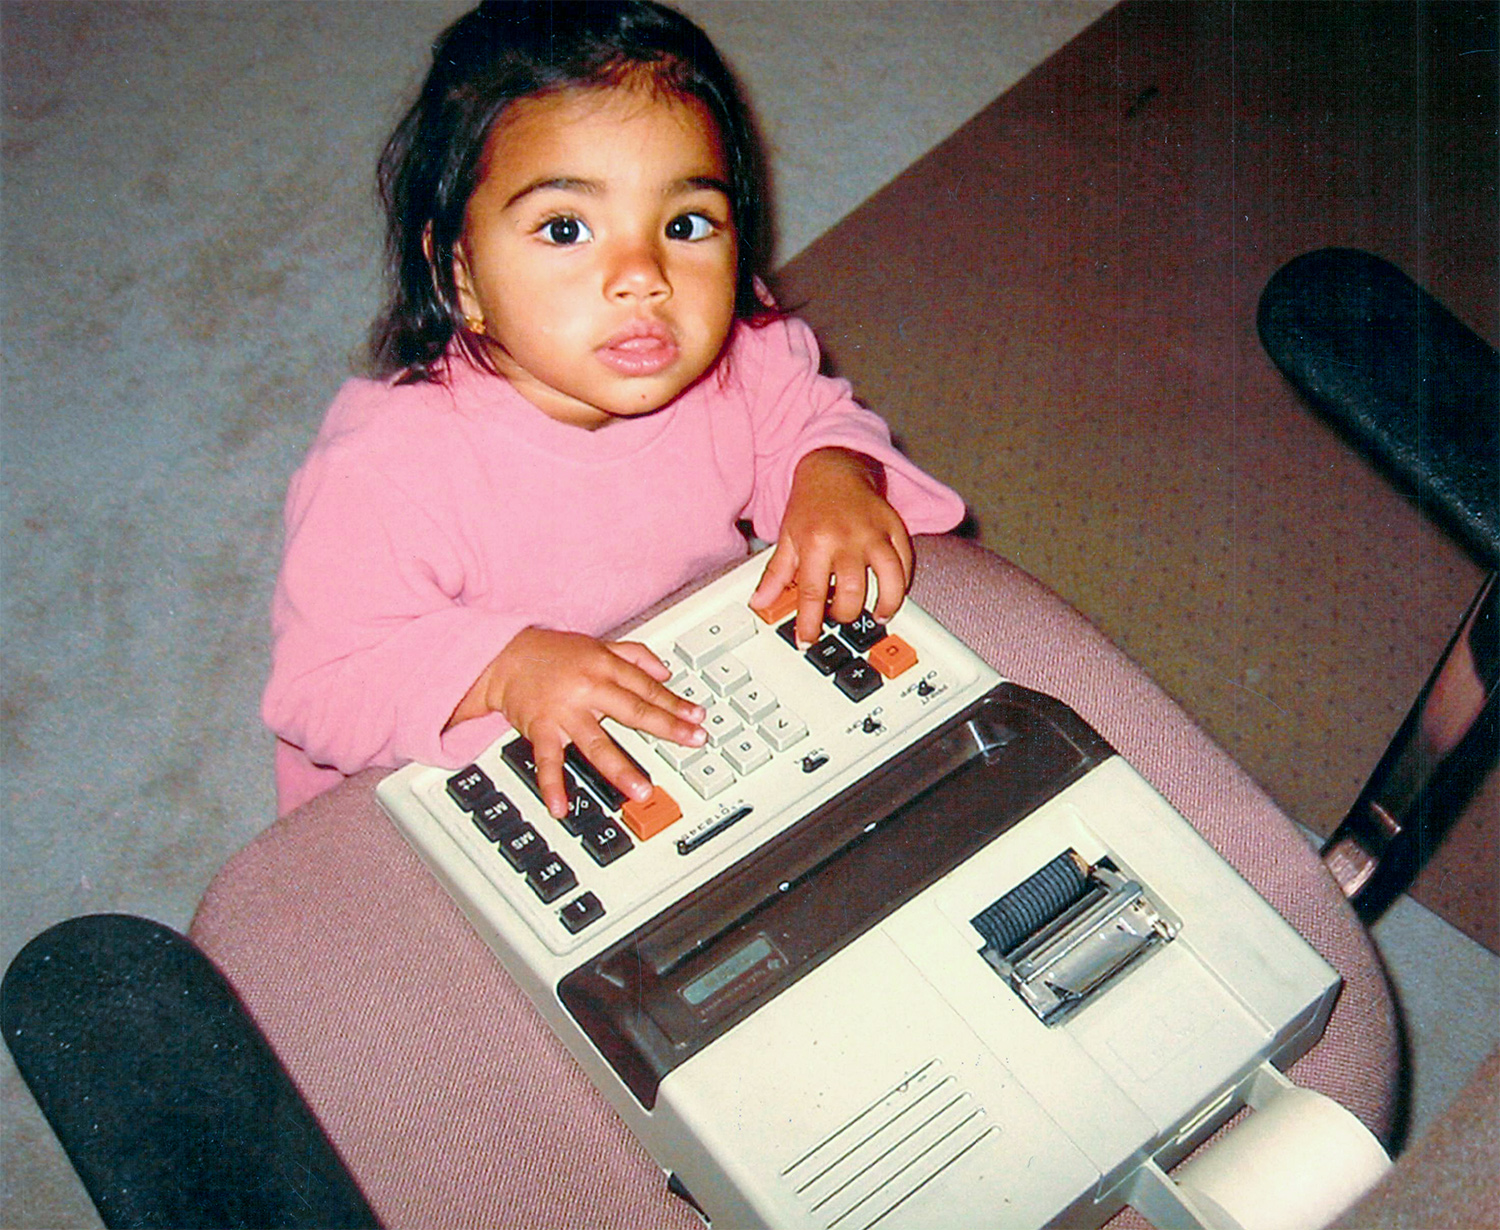 Sangeeta Bhatia, age 2, places both hands on a large calculator.